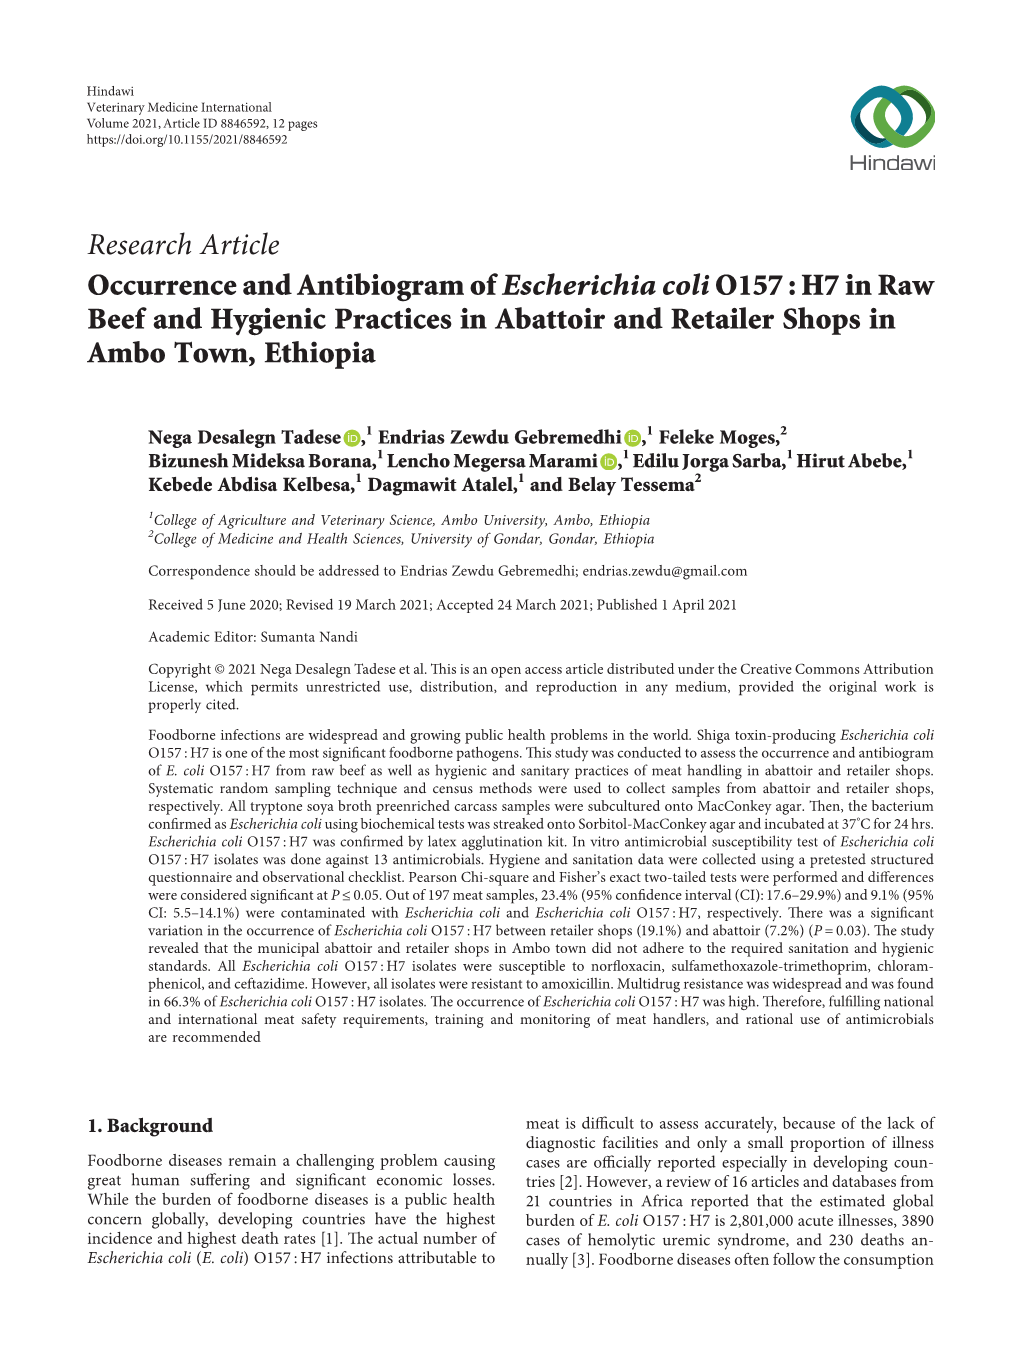 Research Article Occurrence and Antibiogram of Escherichia Coli O157 : H7 in Raw Beef and Hygienic Practices in Abattoir and Retailer Shops in Ambo Town, Ethiopia